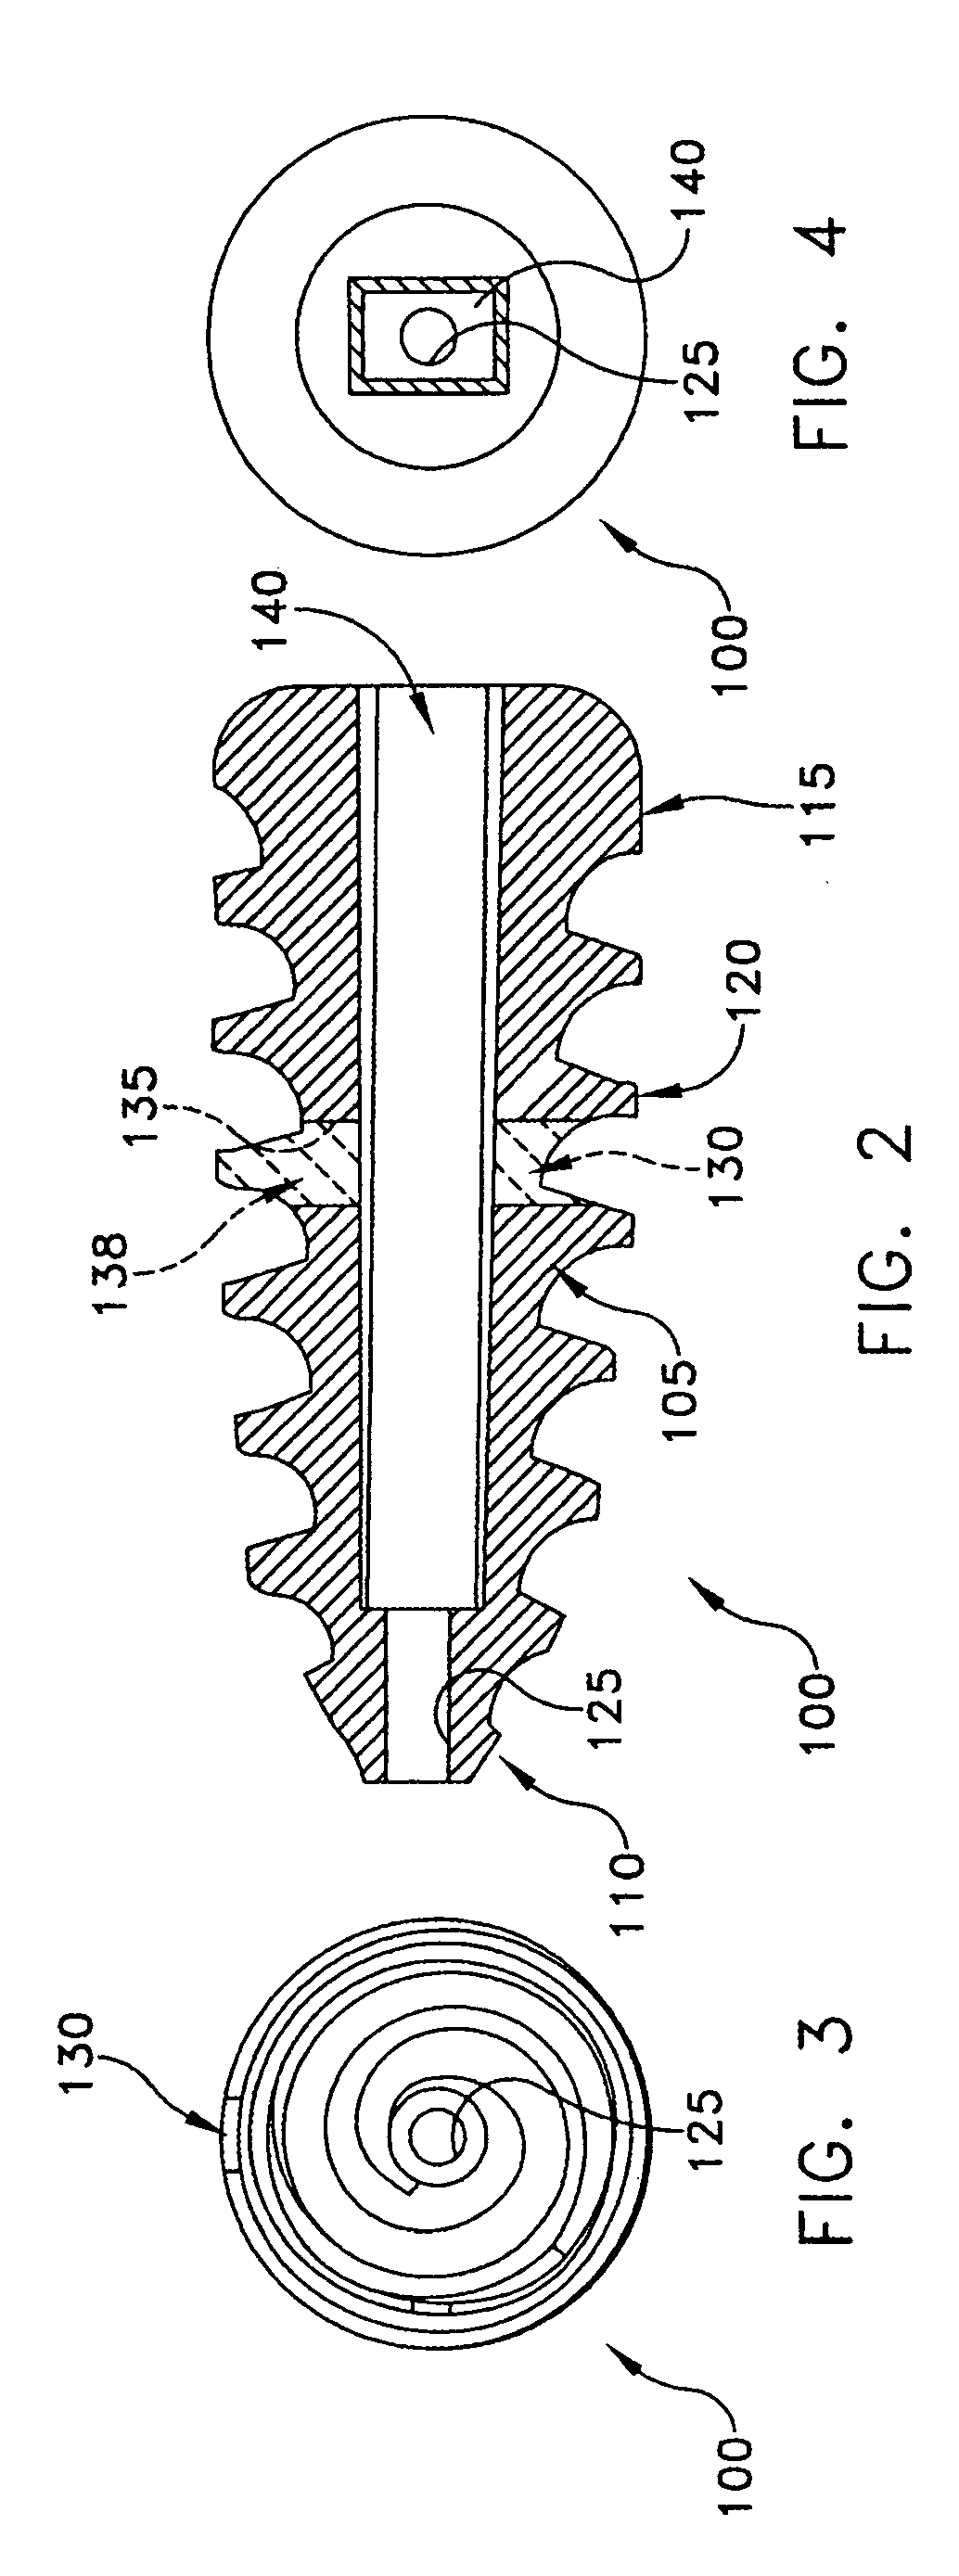 Apparatus and method for attaching a graft ligament to a bone